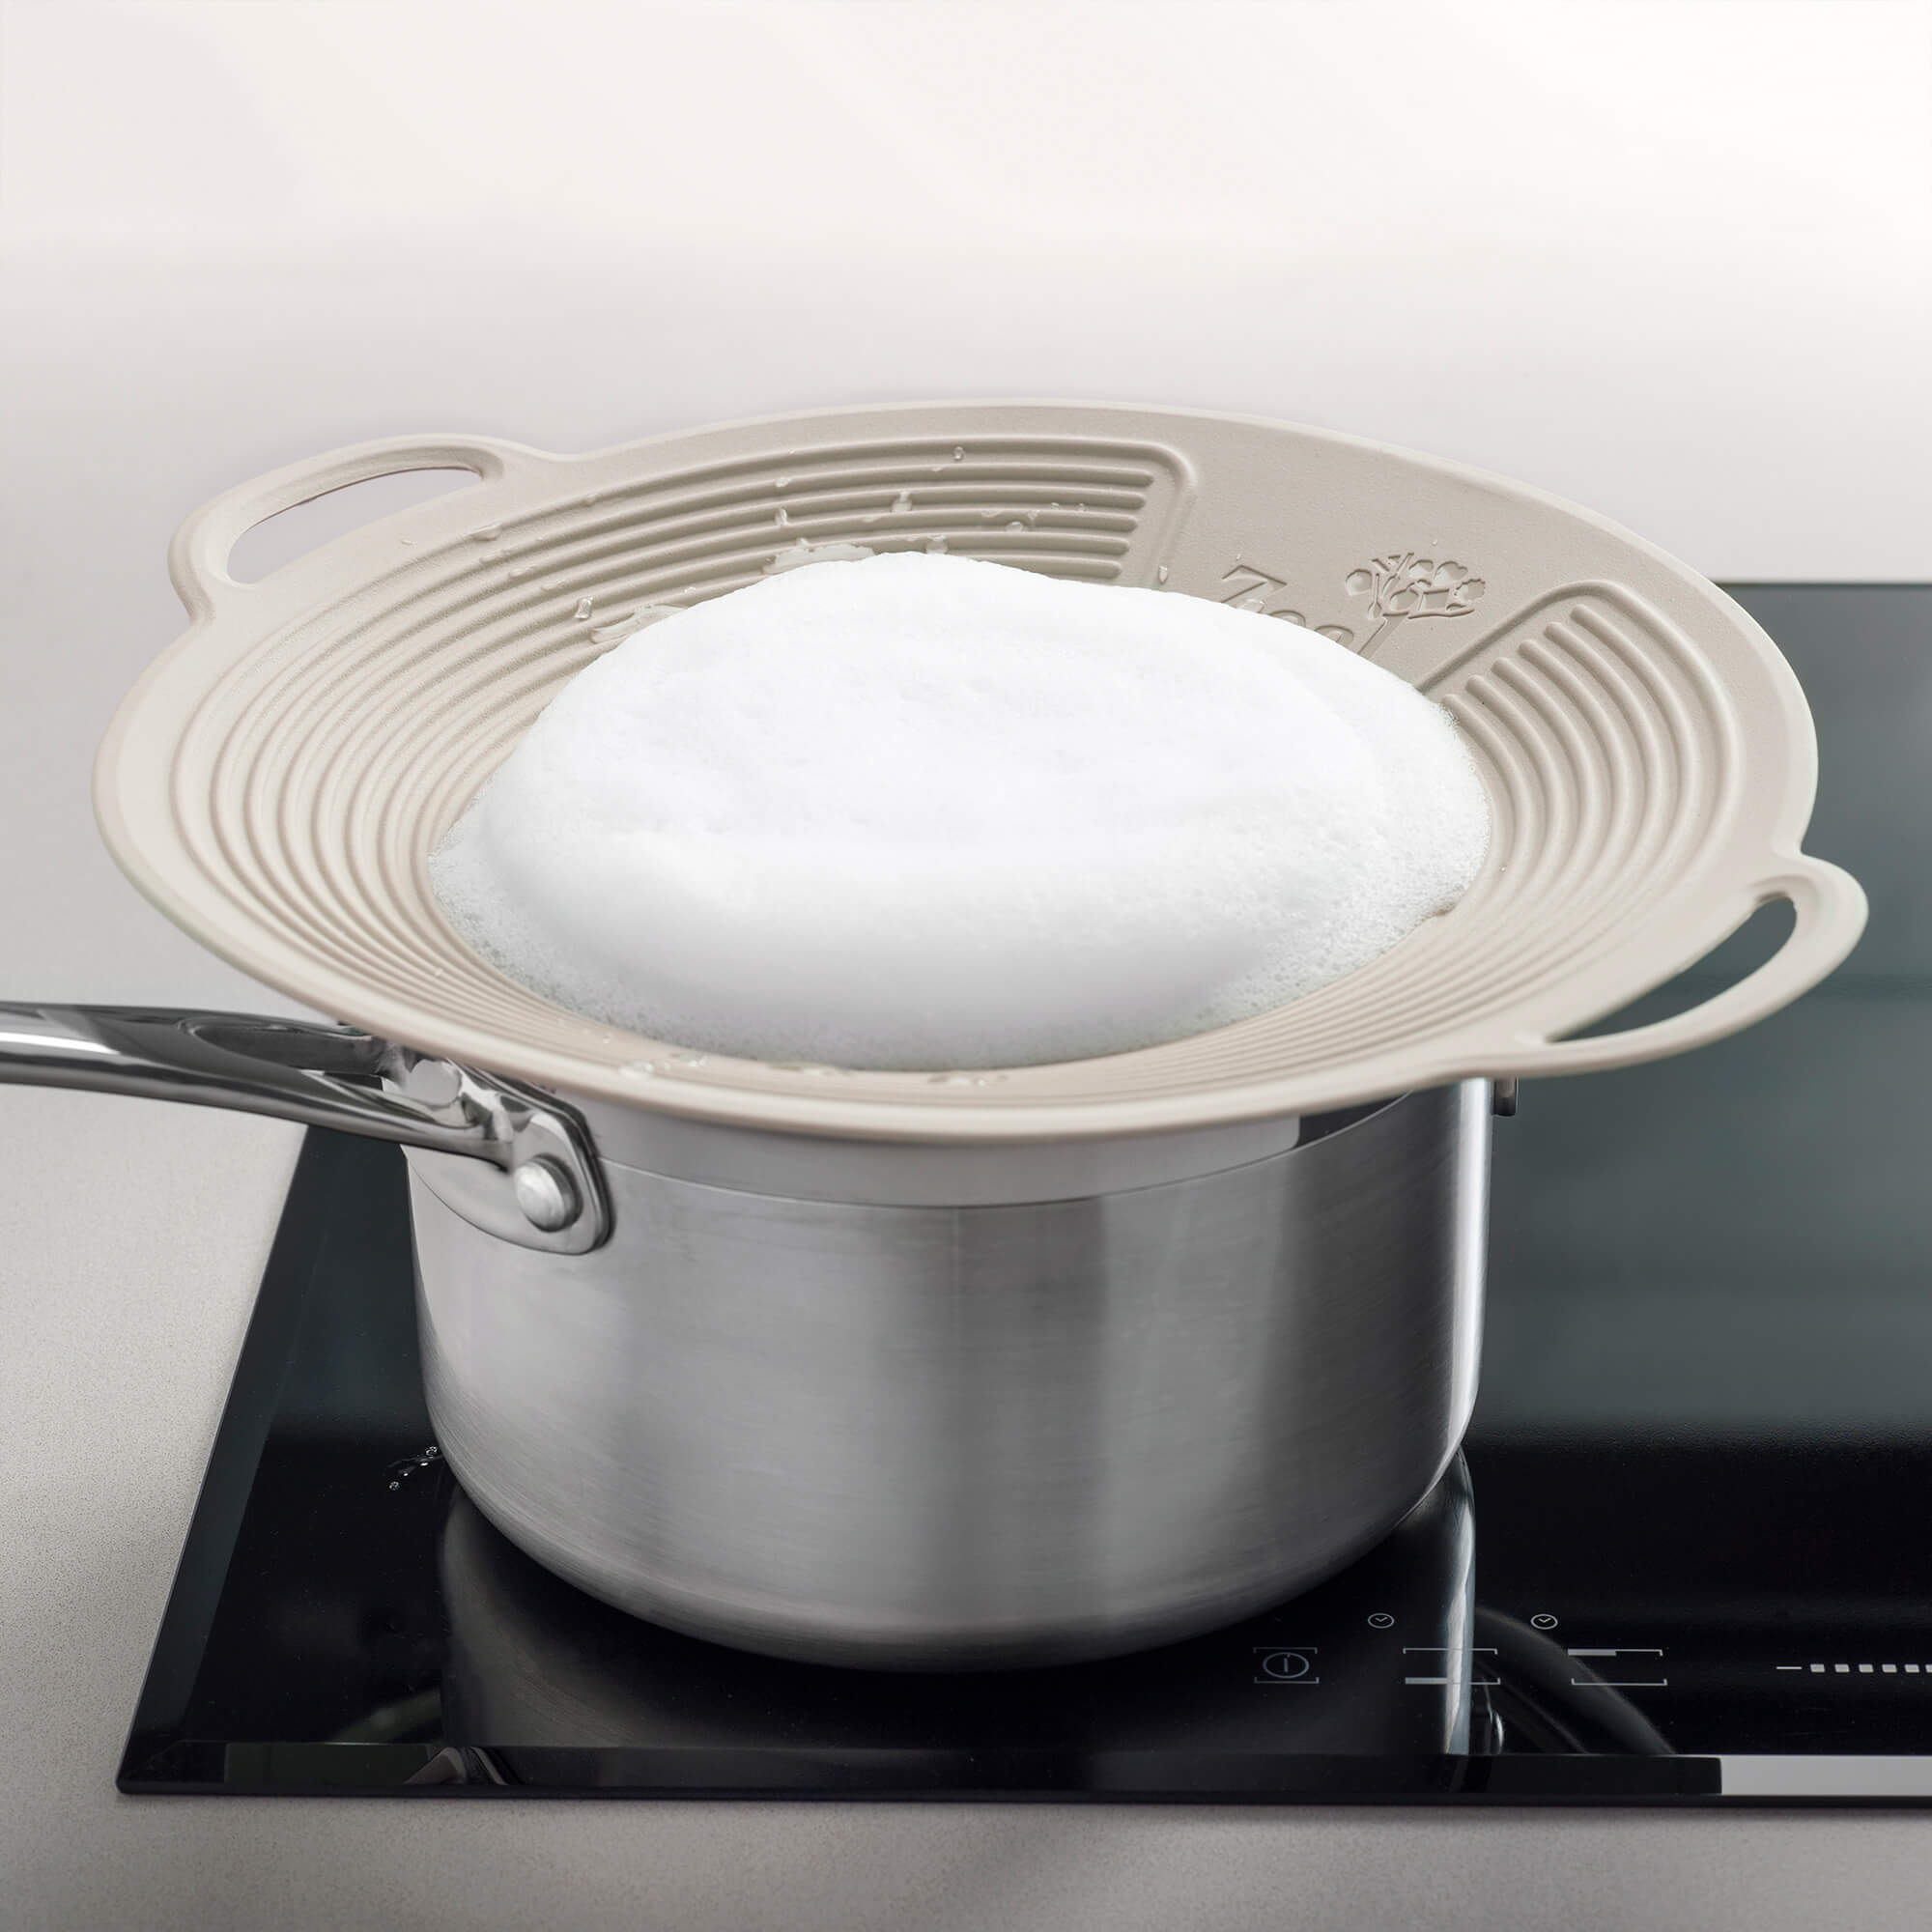 SWISS WONDER MULTI-PURPOSE:Lid cover easily use as a boil over spill guard  Or use as a lid to cover your food in the microwave. This lid features a  steam-release vent and silicone